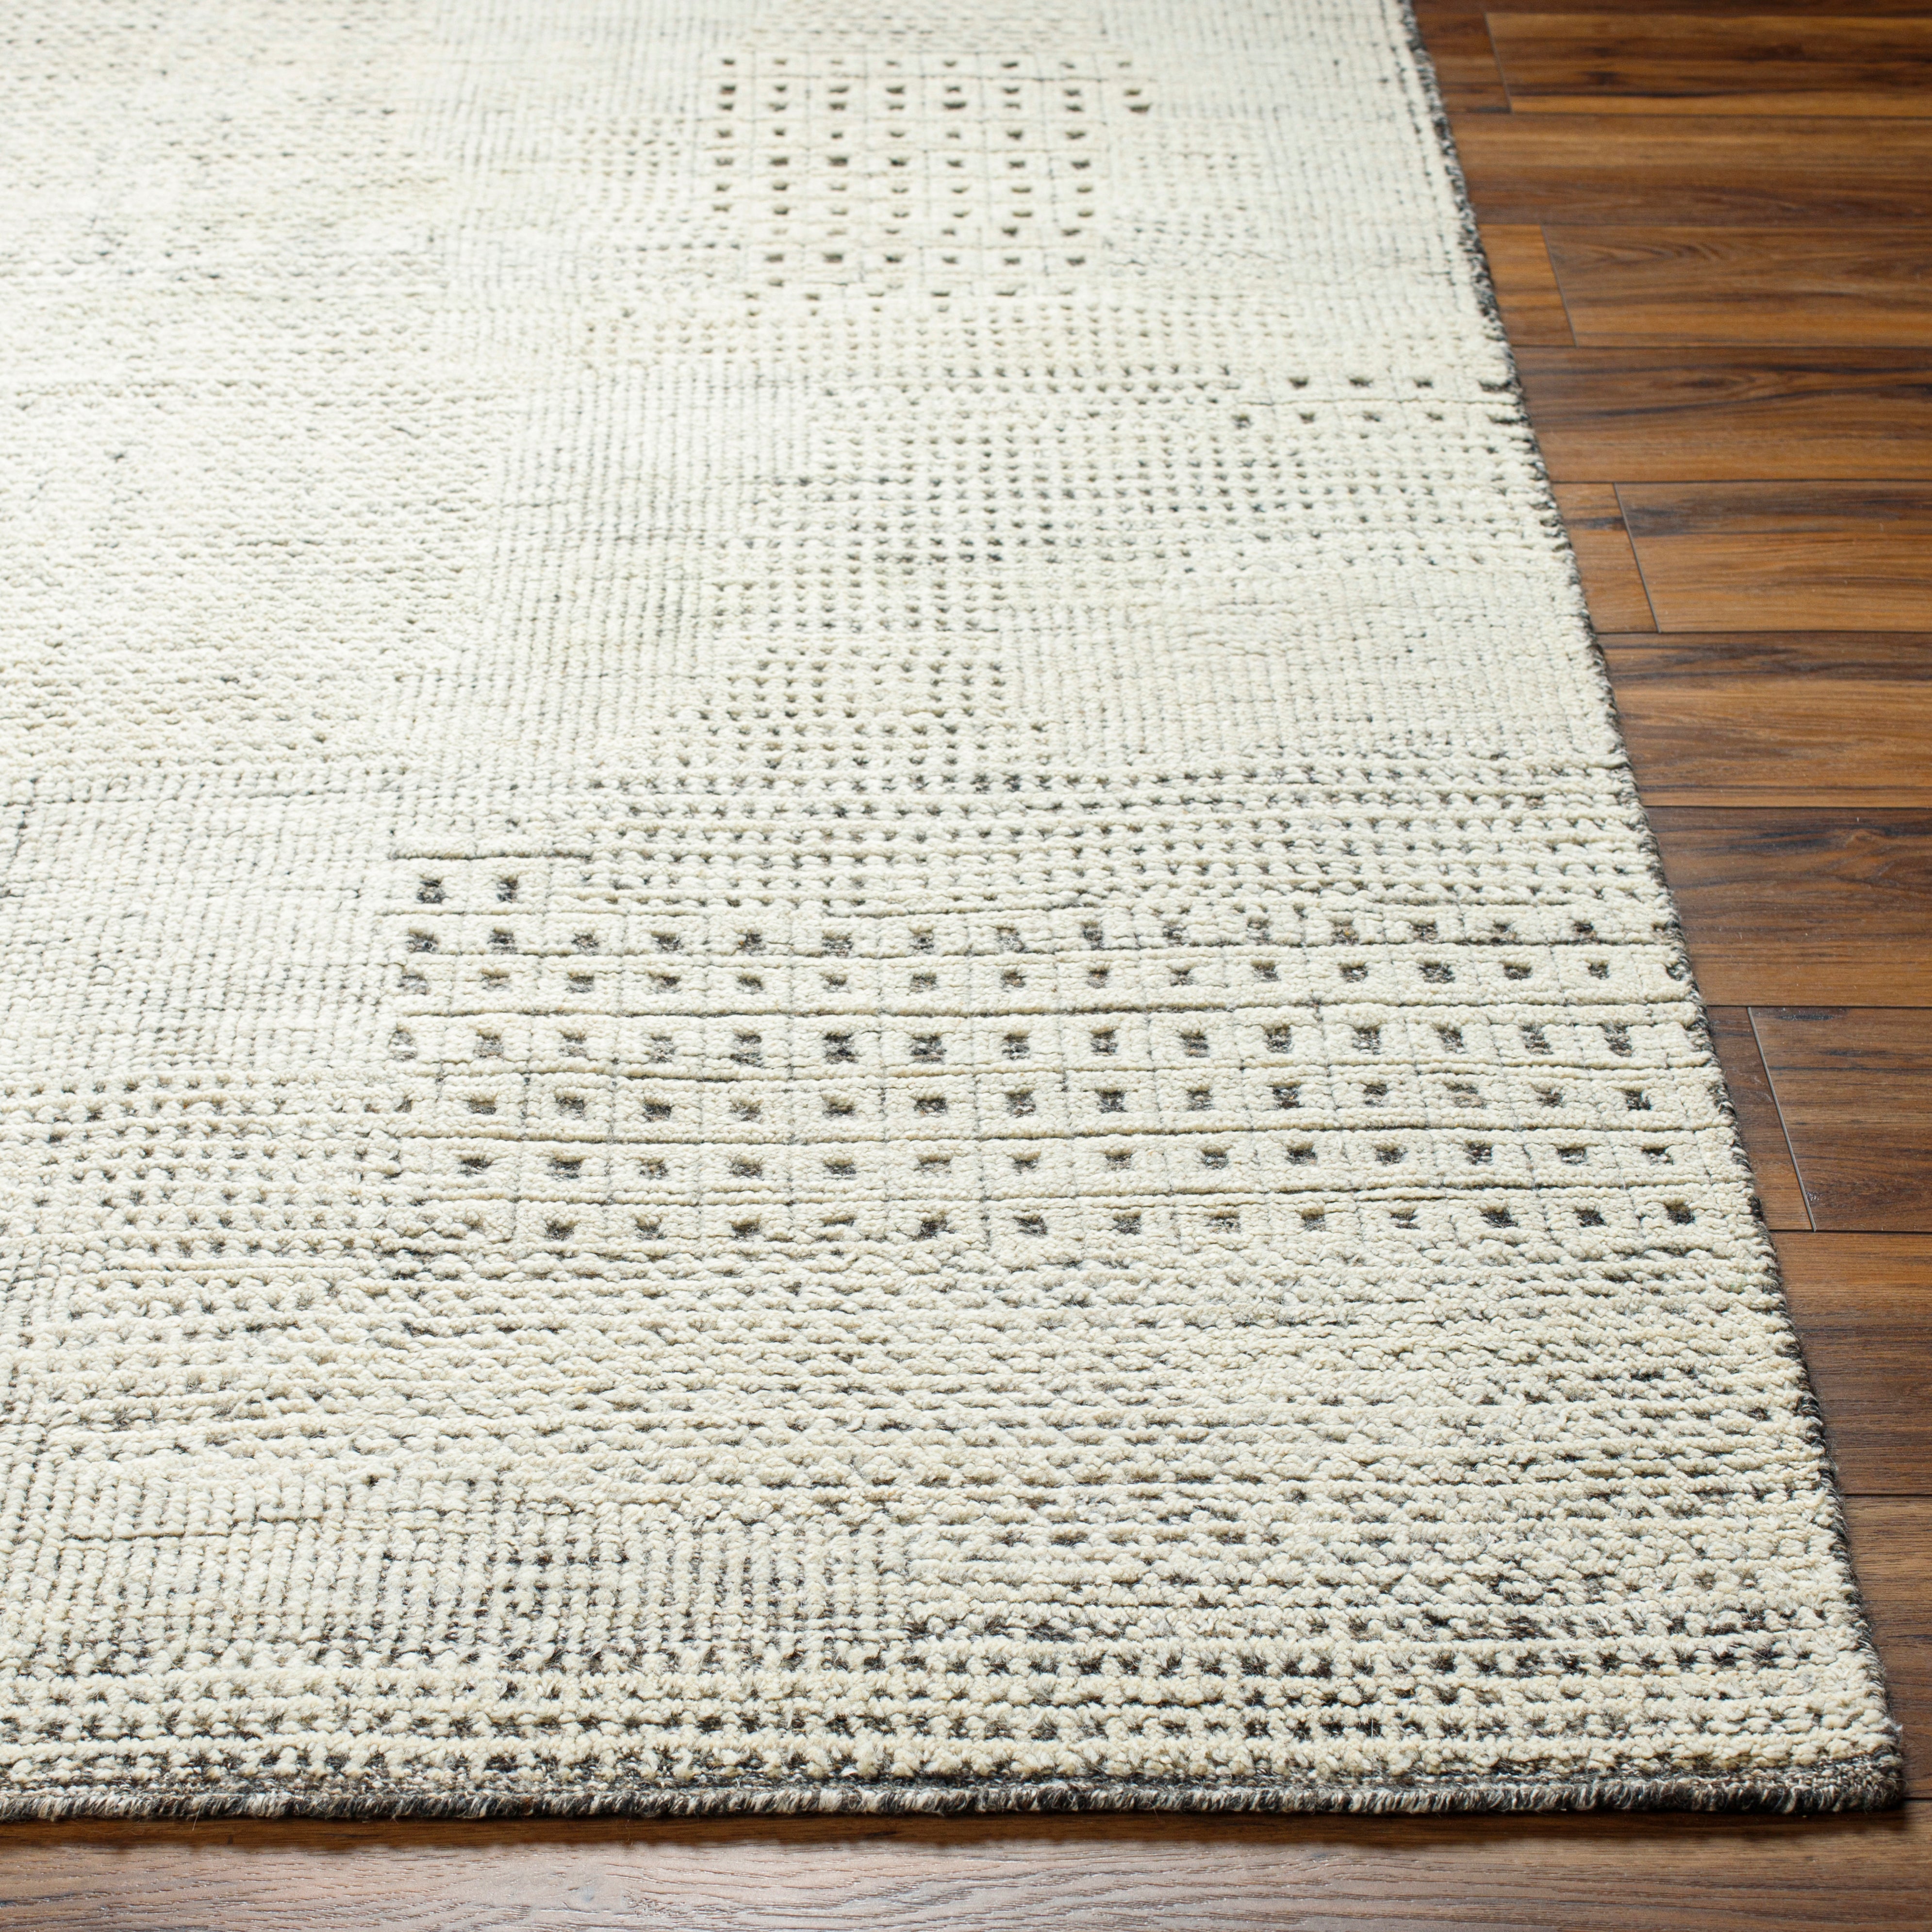 The Tunus Taupe Rug features a globally inspired design made from wool. The hand-knotted rug adds wabi sabi charm to any room. Amethyst Home provides interior design, new home construction design consulting, vintage area rugs, and lighting in the Alpharetta metro area.